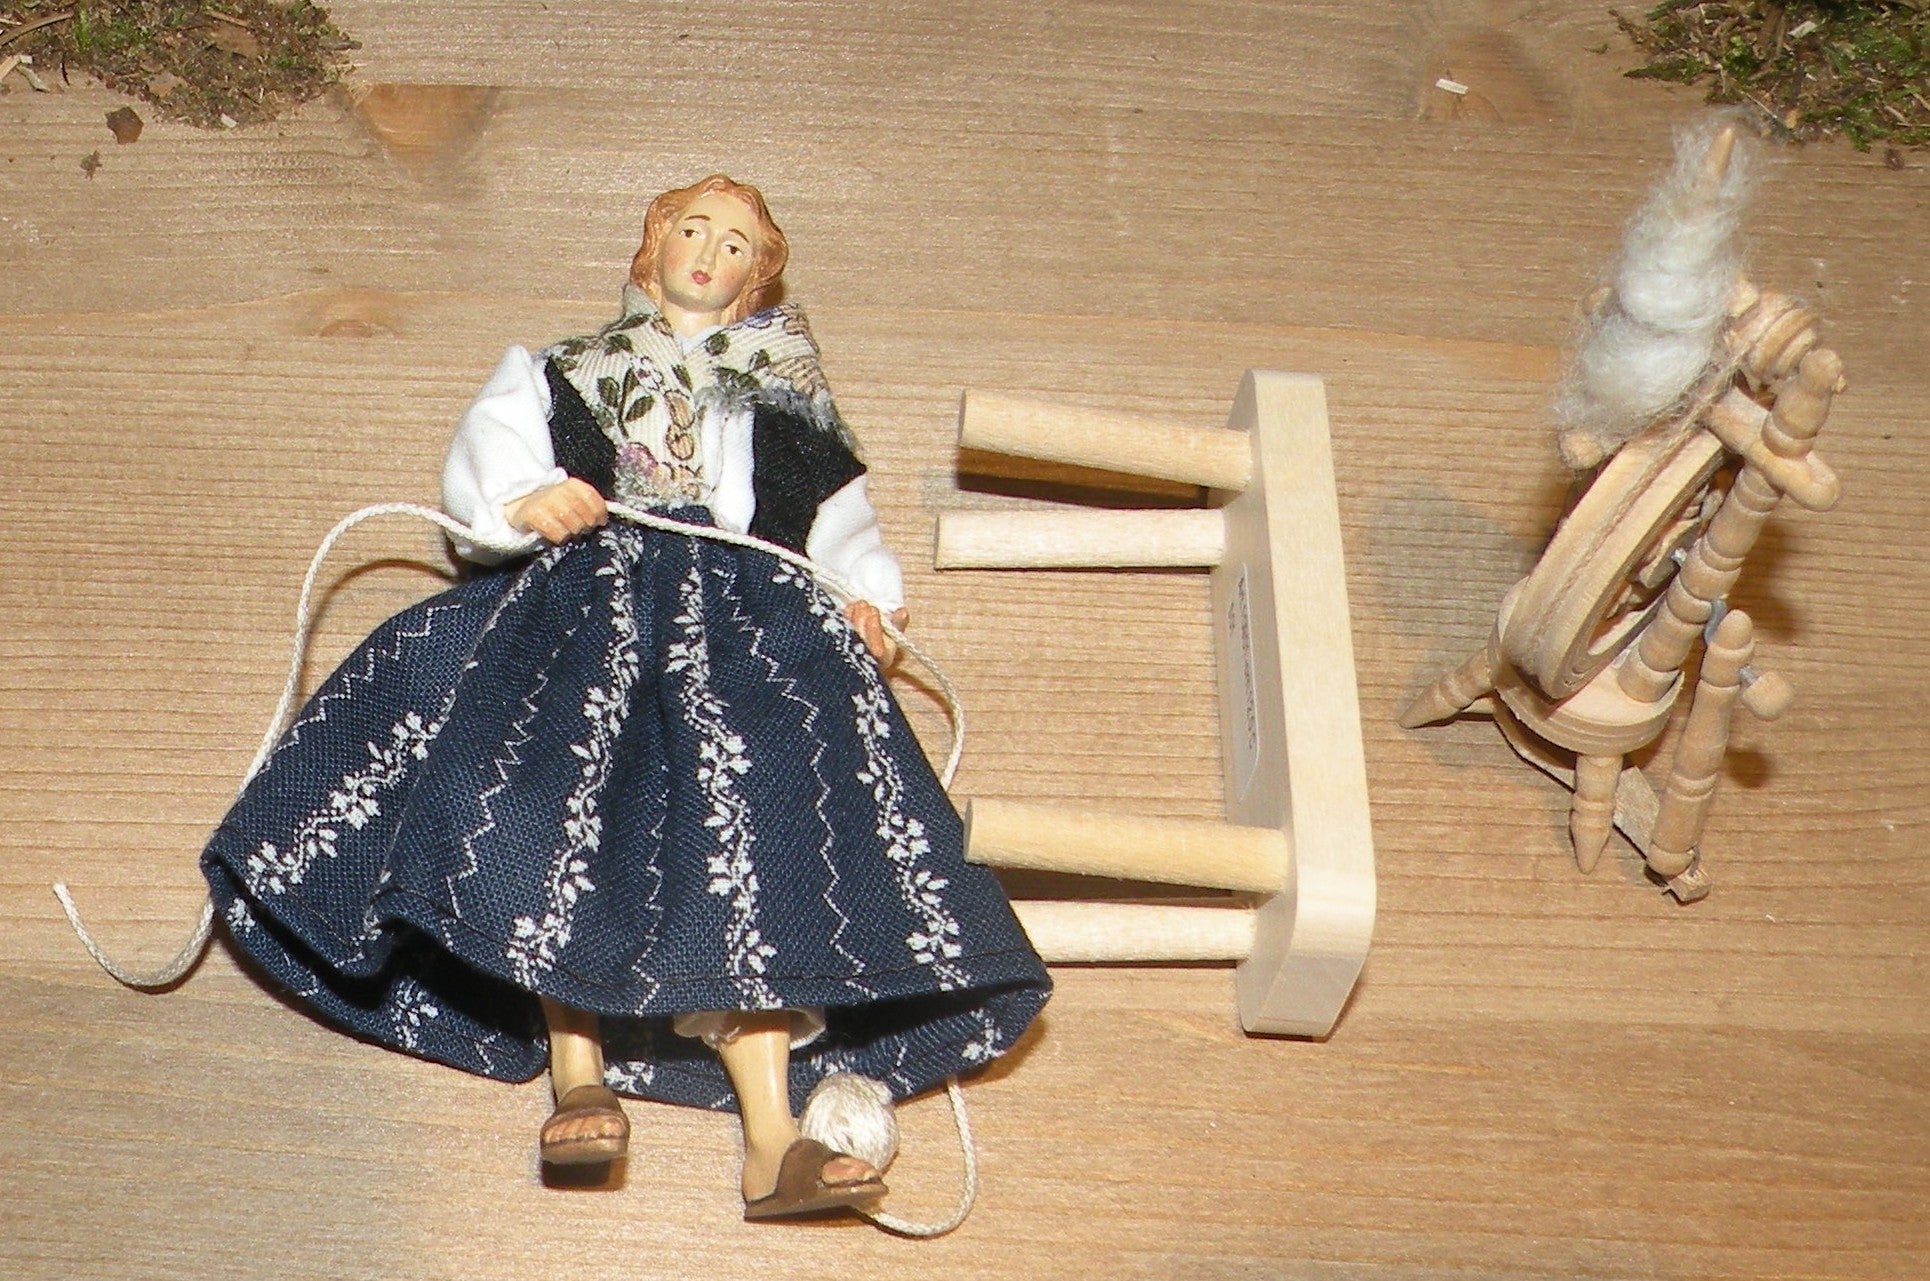 Spinning woman with spinning-wheel - Folk nativity dressed- 10901-501